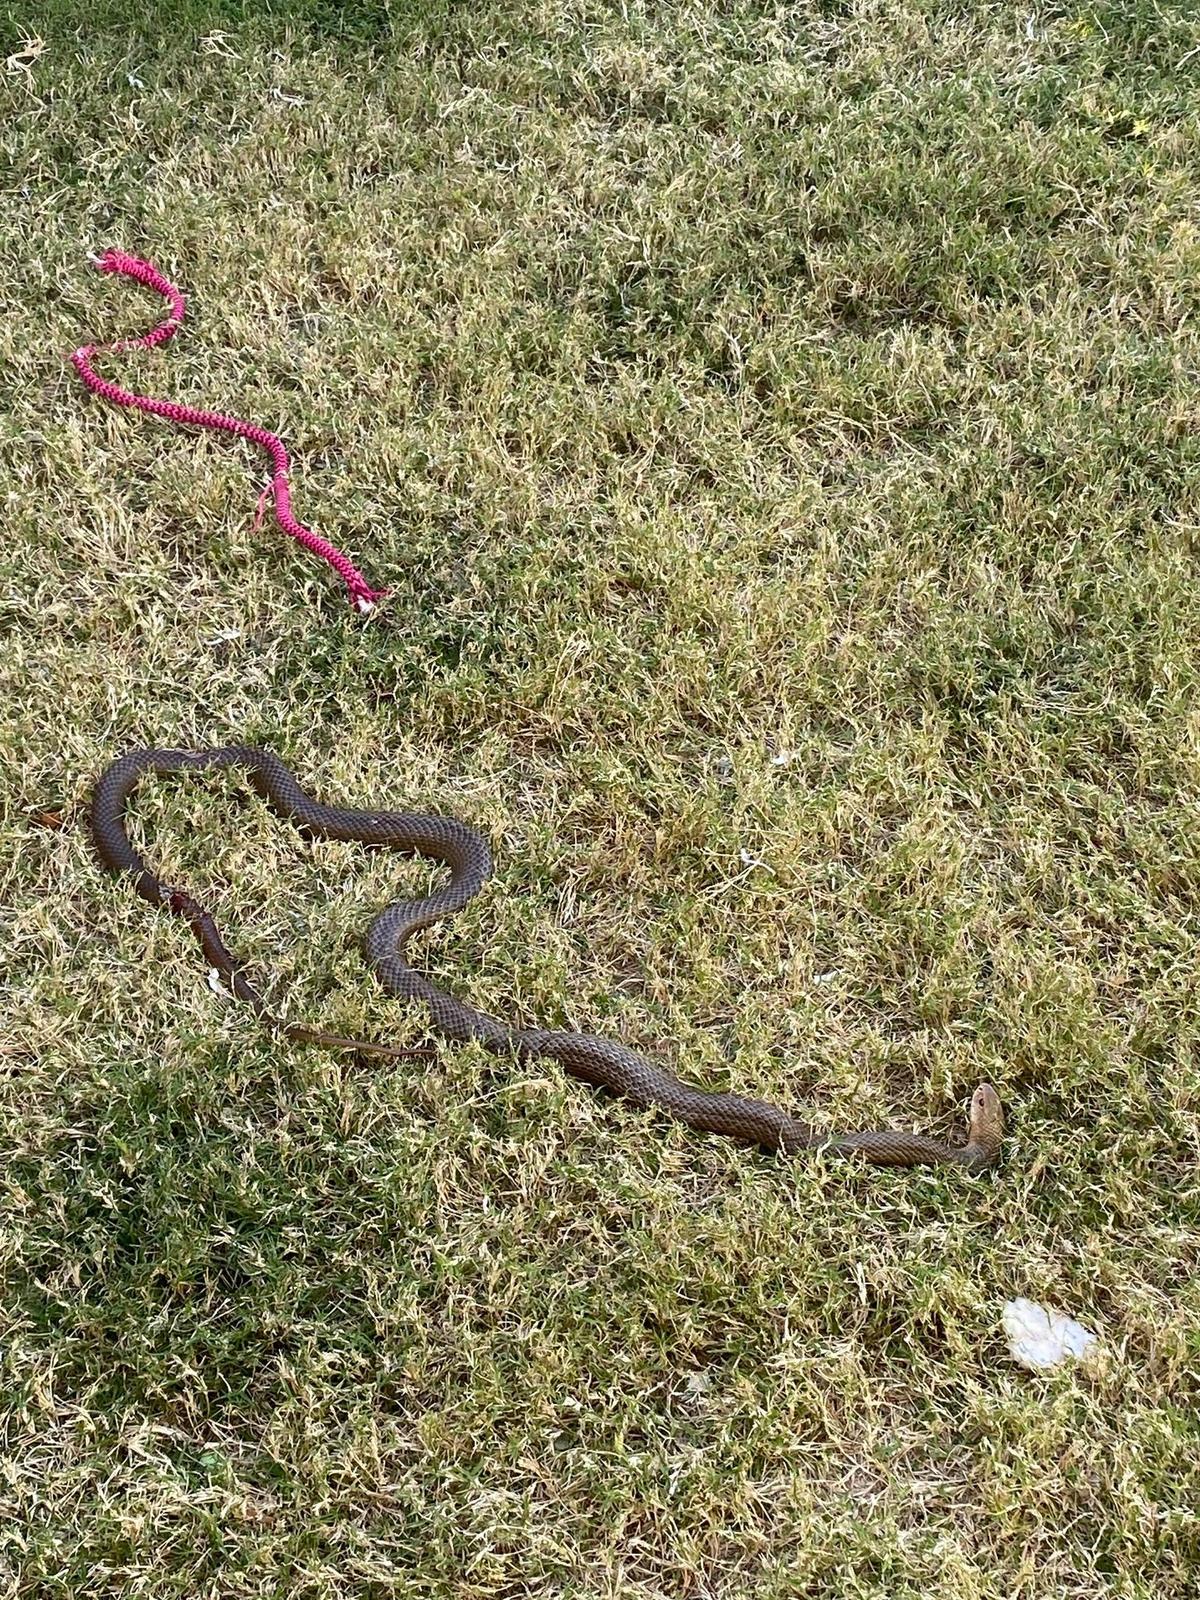 The brown snake that attacked Madeline's dogs in her backyard. (Courtesy of <a href="https://www.facebook.com/maddy.allen.9">Madeline Mills</a>)